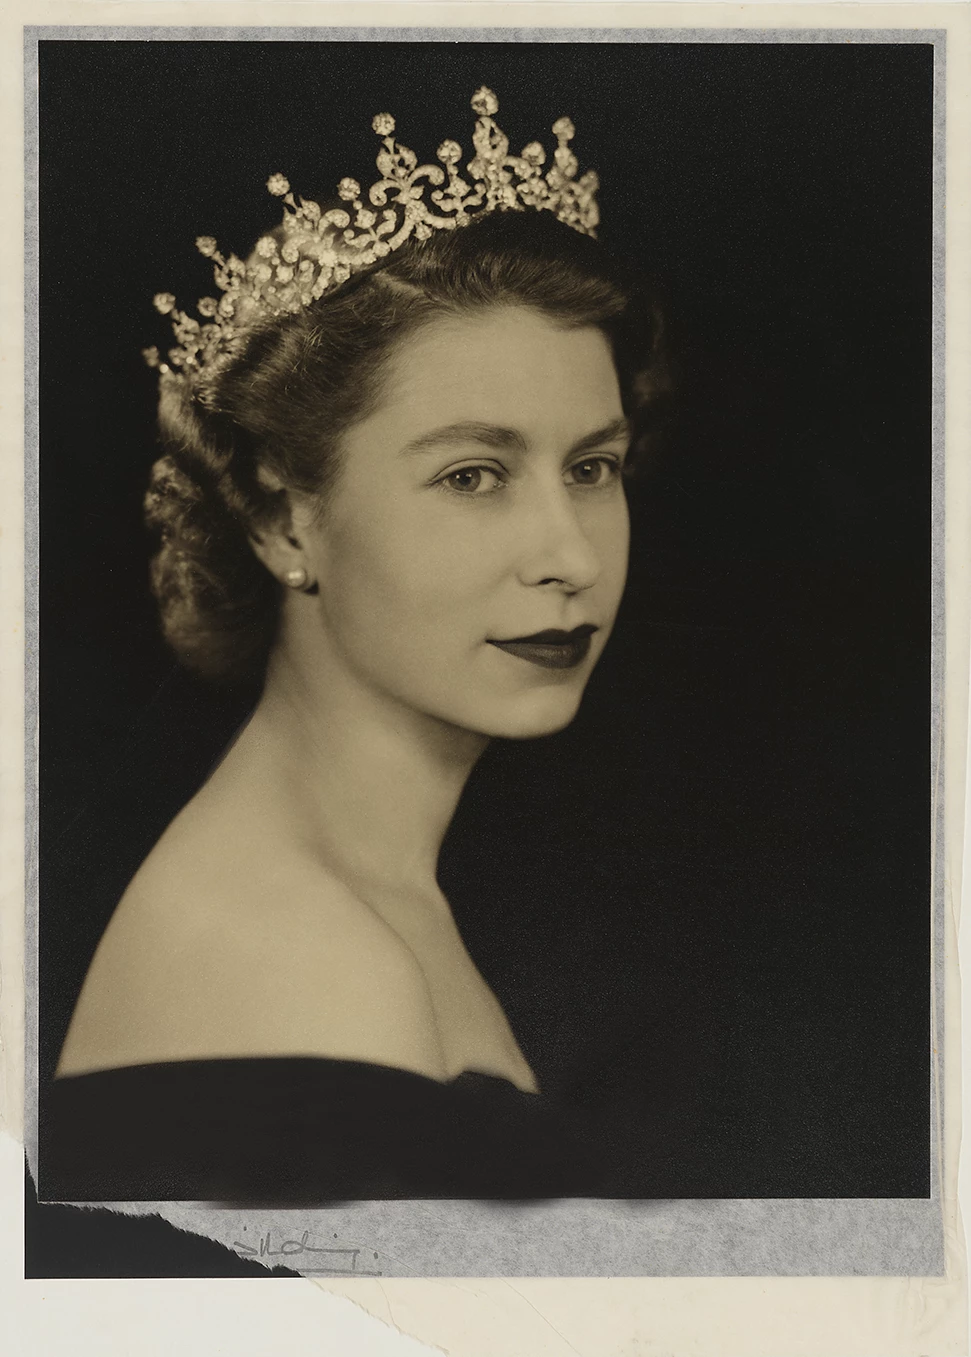 Platinum Jubilee: The most iconic images of The Queen